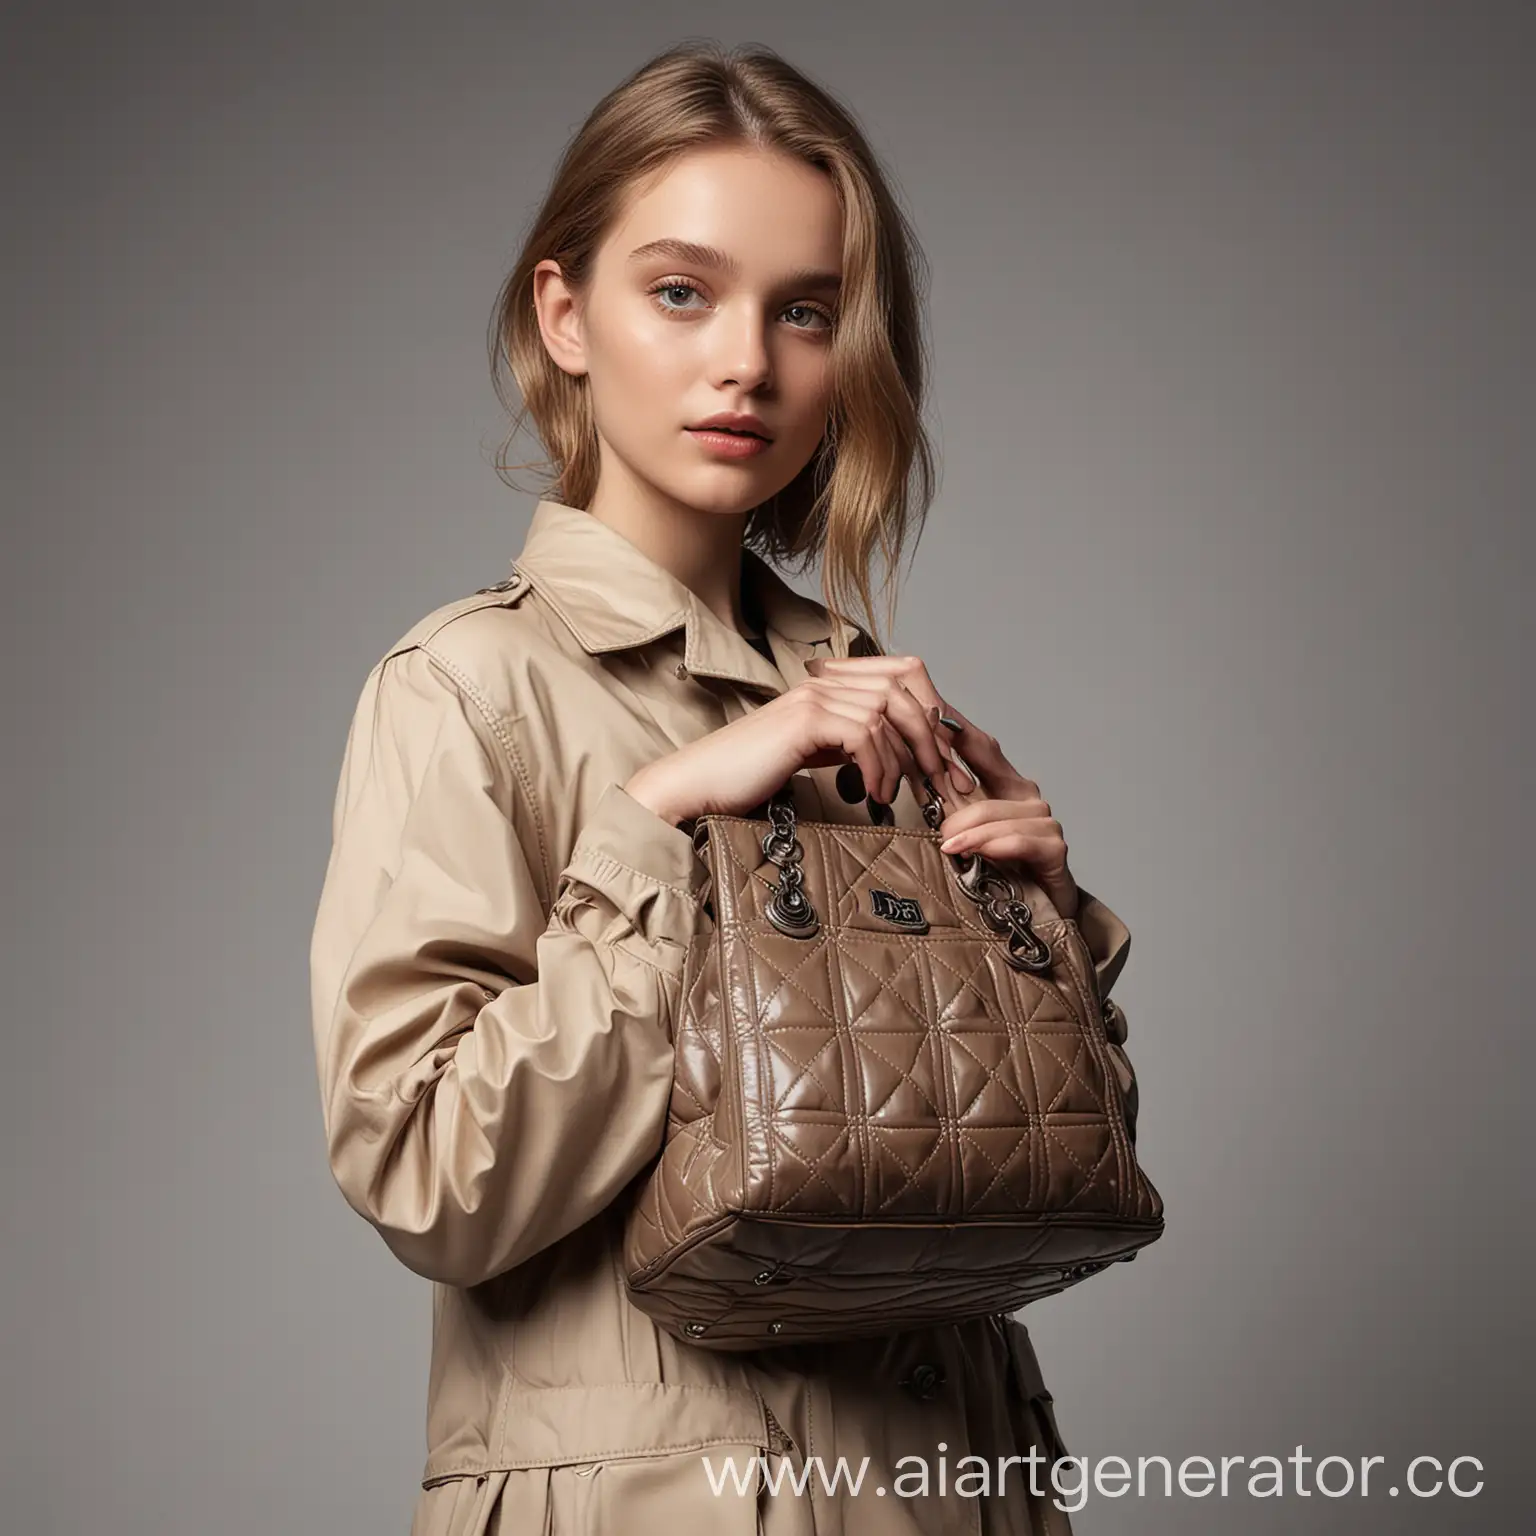 photoshoot of a girl with a bag in her hands at a photo studio for a premium bag brand, similar to DIOR